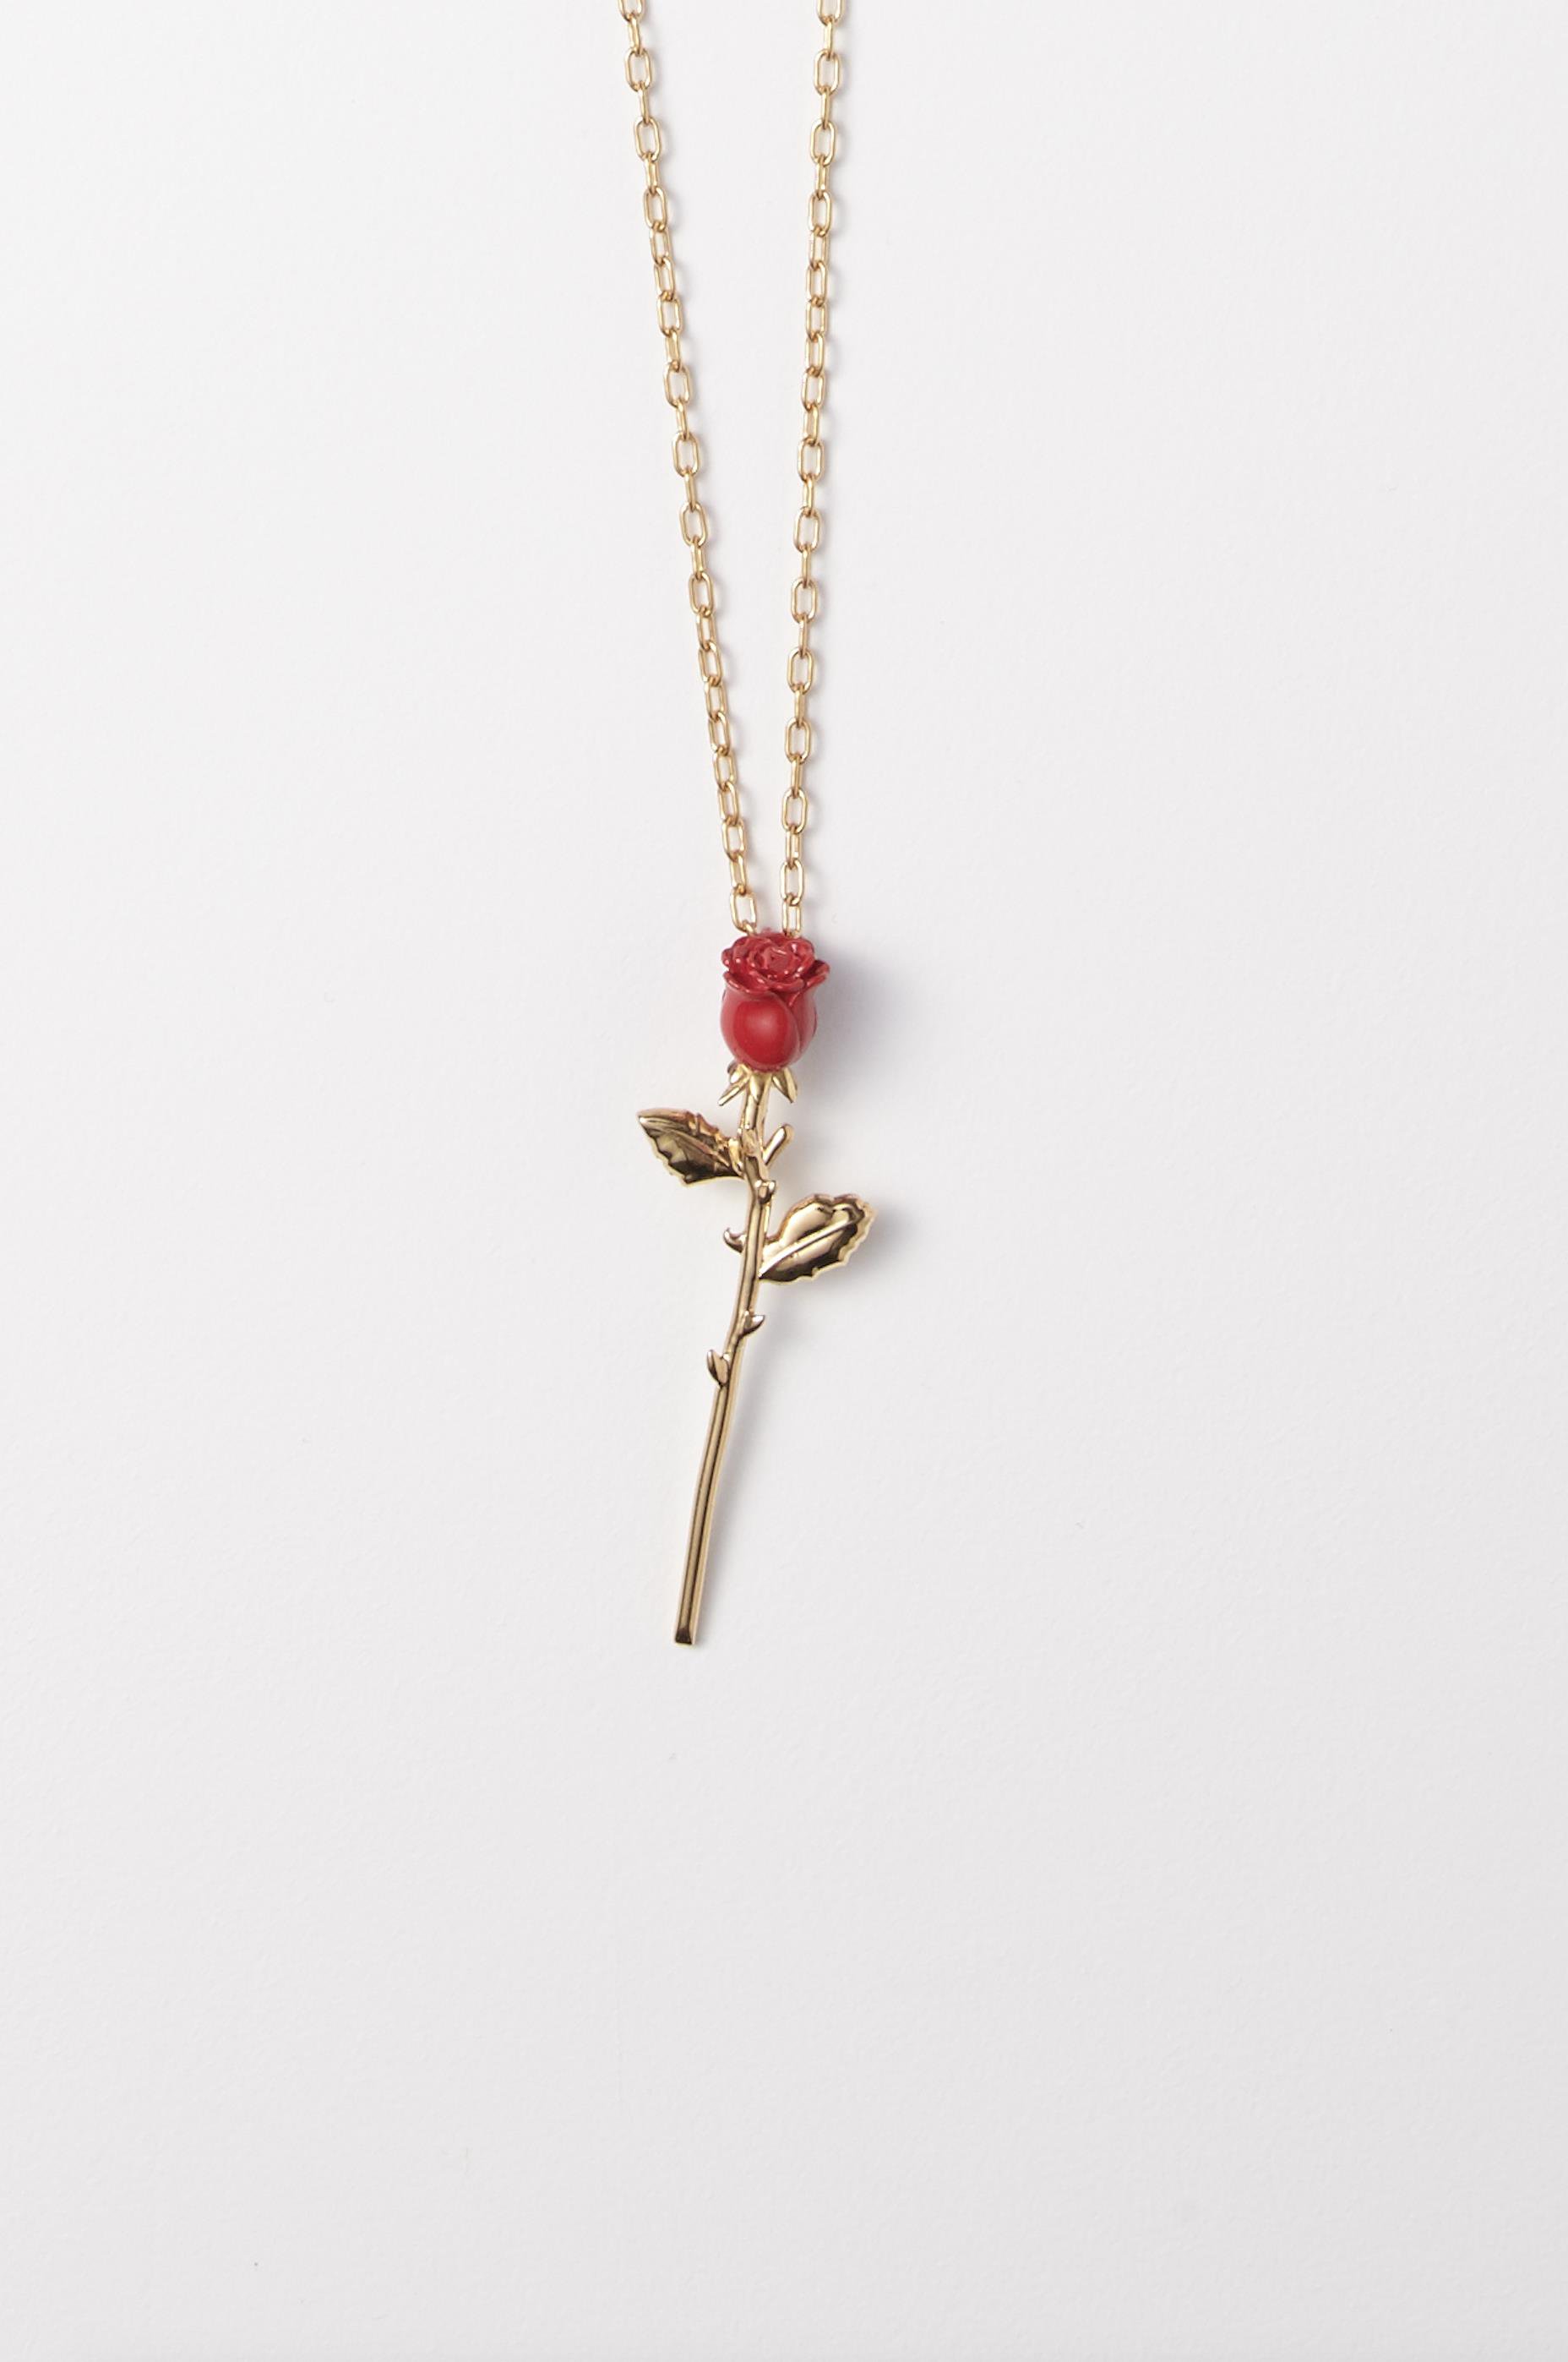 AMBUSH® on Twitter: "Say it with roses. Our highly coveted ROSE CHARM  NECKLACE in limited edition red color way exclusively at the AMBUSH®  WORKSHOP &amp; WEB SHOP https://t.co/vcmKjgeMki #AMBUSH® #ROSE #MOTHERSDAY  https://t.co/2o4wISHcXt" /